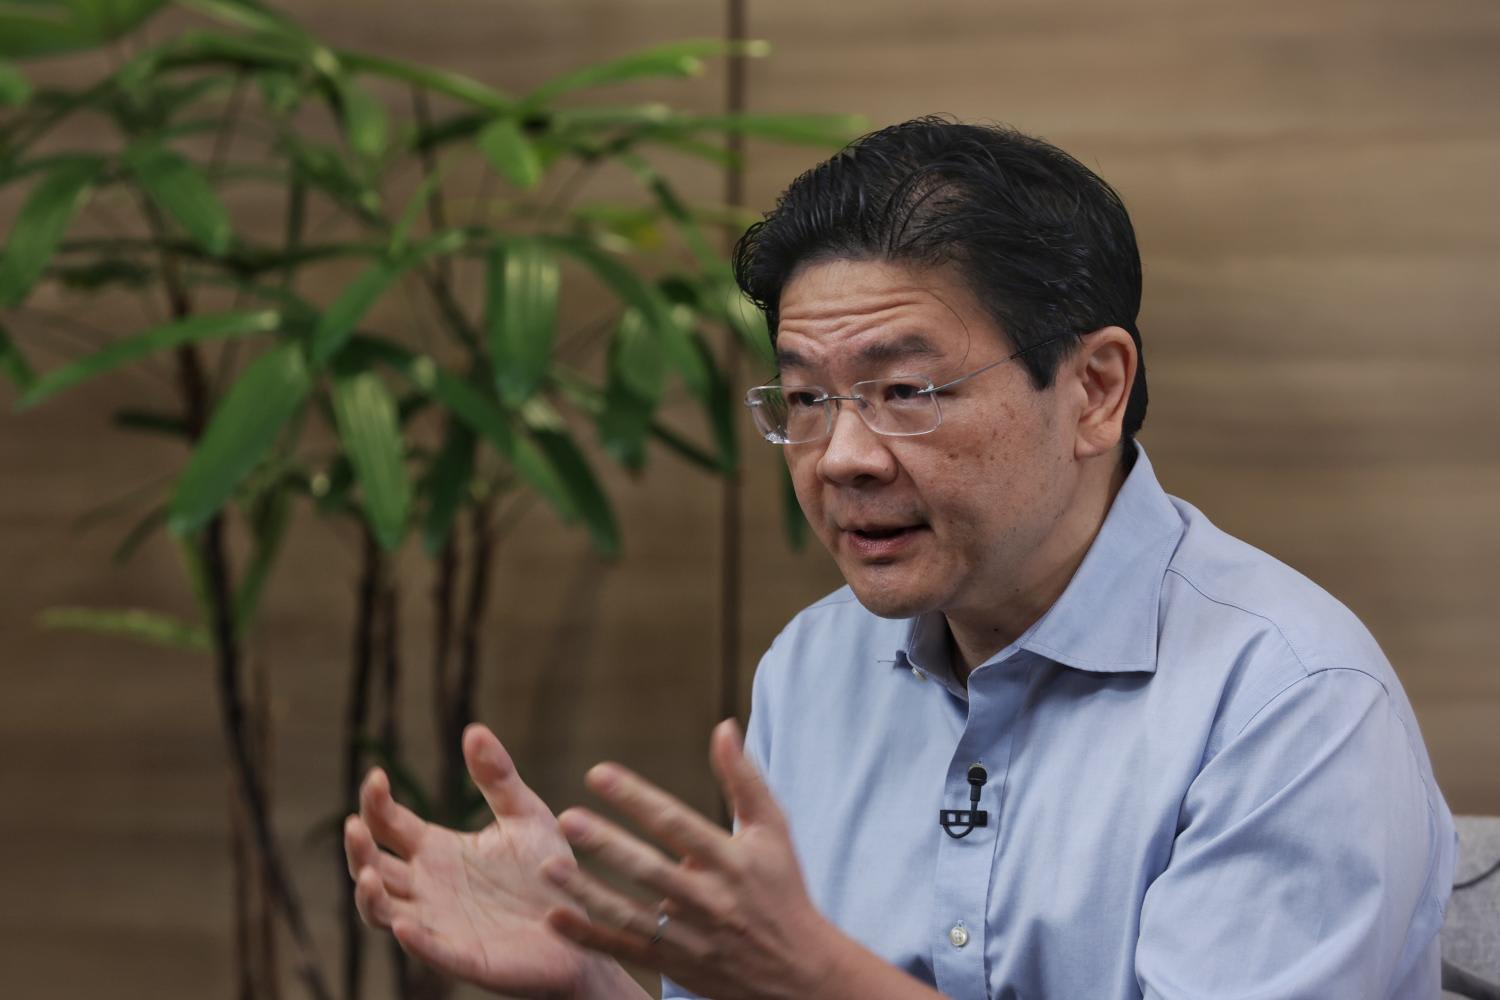 Deputy Prime Minister Lawrence Wong during an interview with broadcaster CNA on Aug 22, 2022.